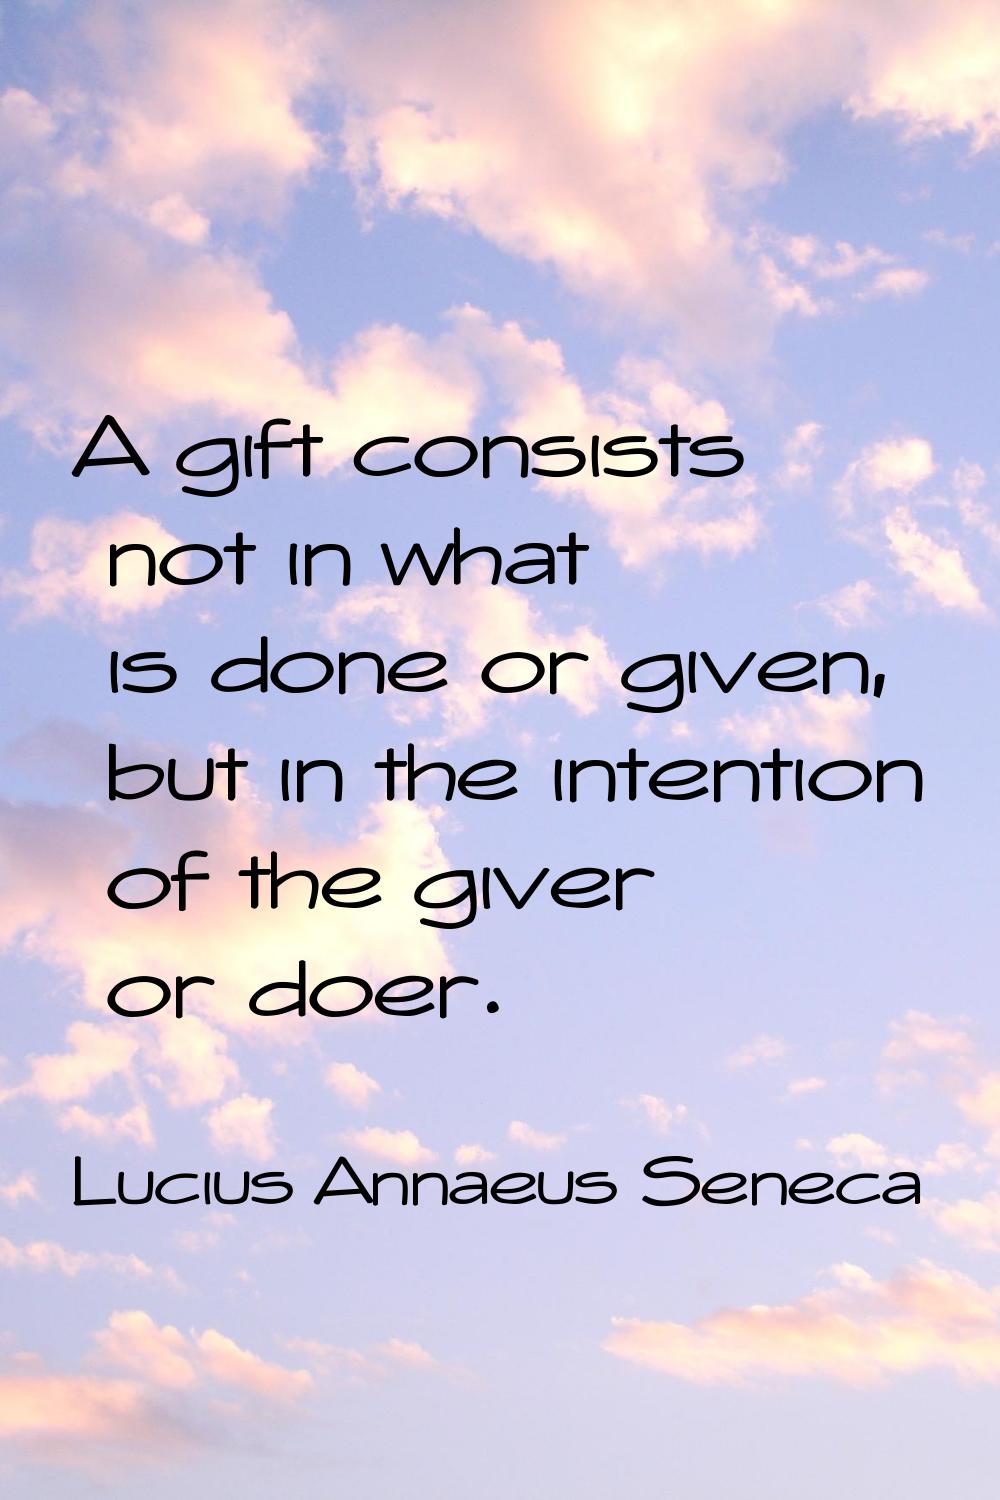 A gift consists not in what is done or given, but in the intention of the giver or doer.